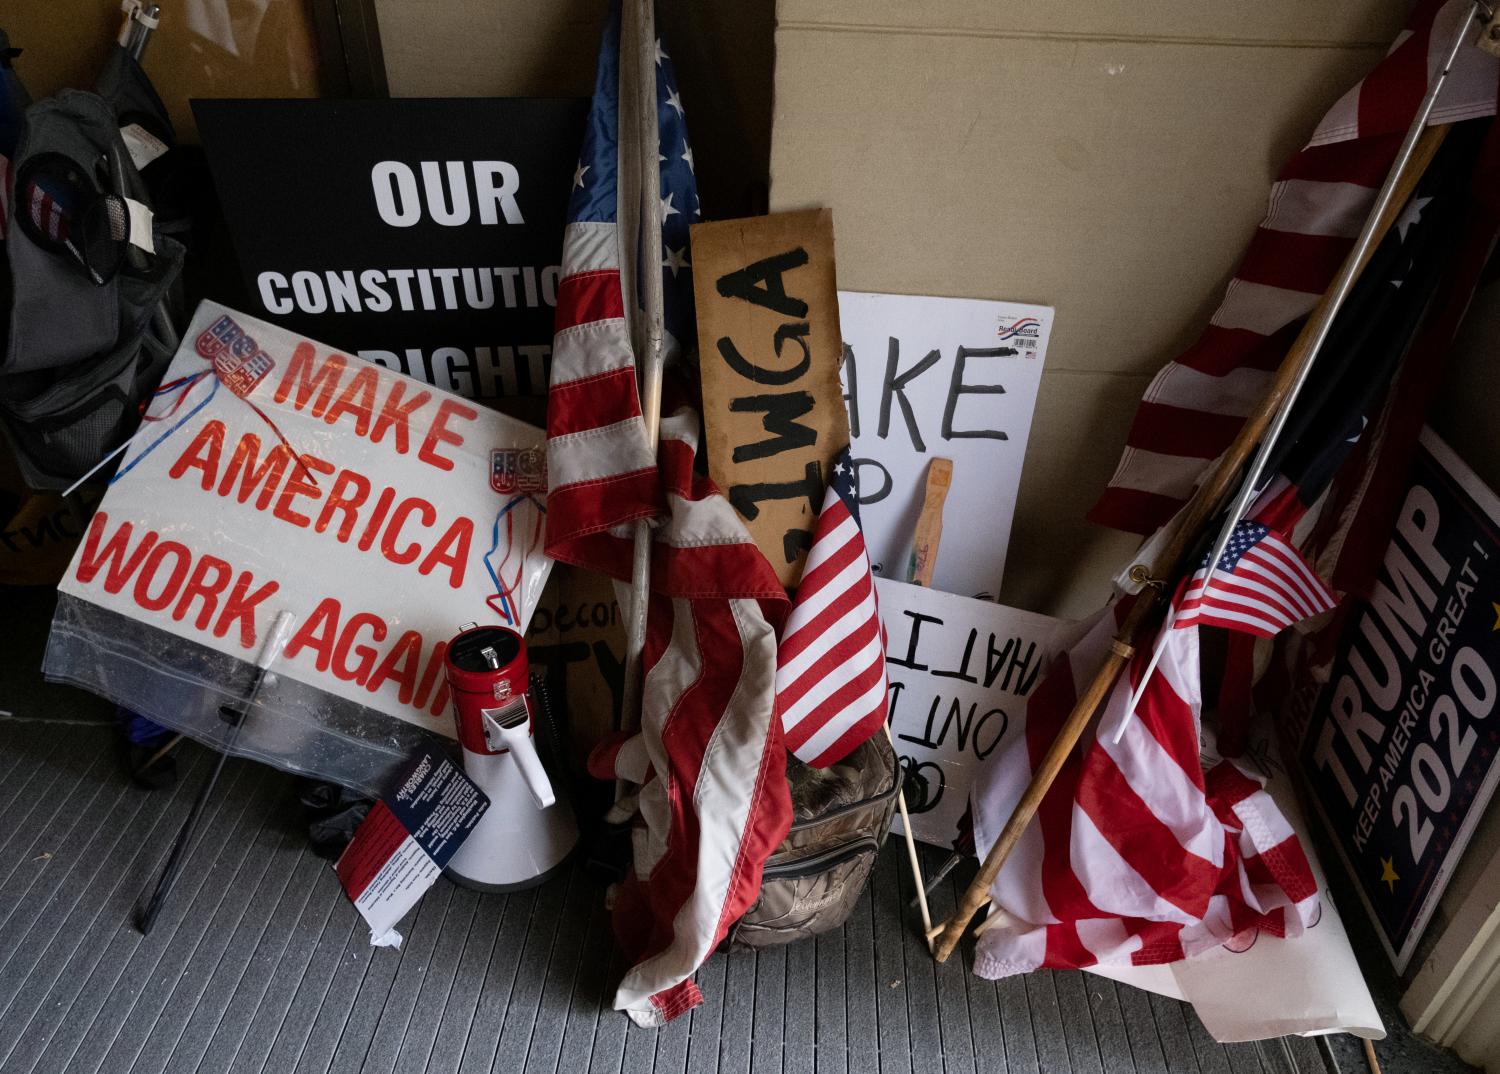 Protesters leave their flags and signs at the entrance of the state capitol building after protesters occupied the building during a vote to approve the extension of Governor Gretchen Whitmer's emergency declaration/stay-at-home order due to the coronavirus disease (COVID-19) outbreak, at the state capitol in Lansing, Michigan, U.S. April 30, 2020.  REUTERS/Seth Herald